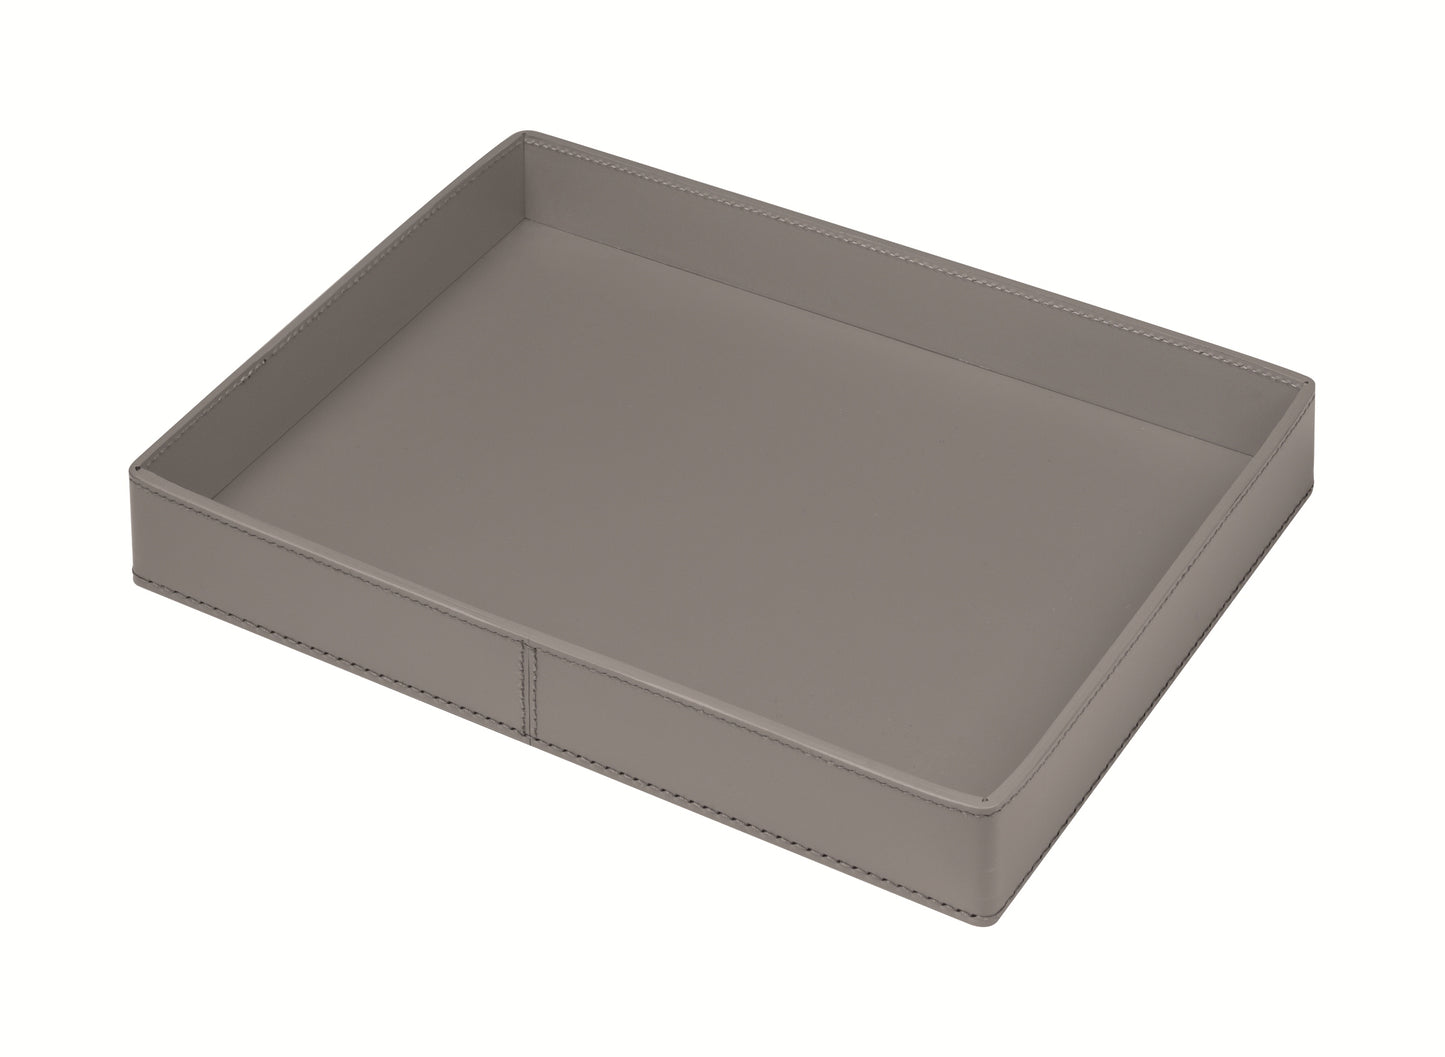 RUDI Narciso Regenerated Leather Vanity Tray | Elegant and Functional Design | Crafted from Finest Regenerated Leather | Water-resistant and UV-resistant Finish | Explore a Range of Luxury Home Accessories at 2Jour Concierge, #1 luxury high-end gift & lifestyle shop